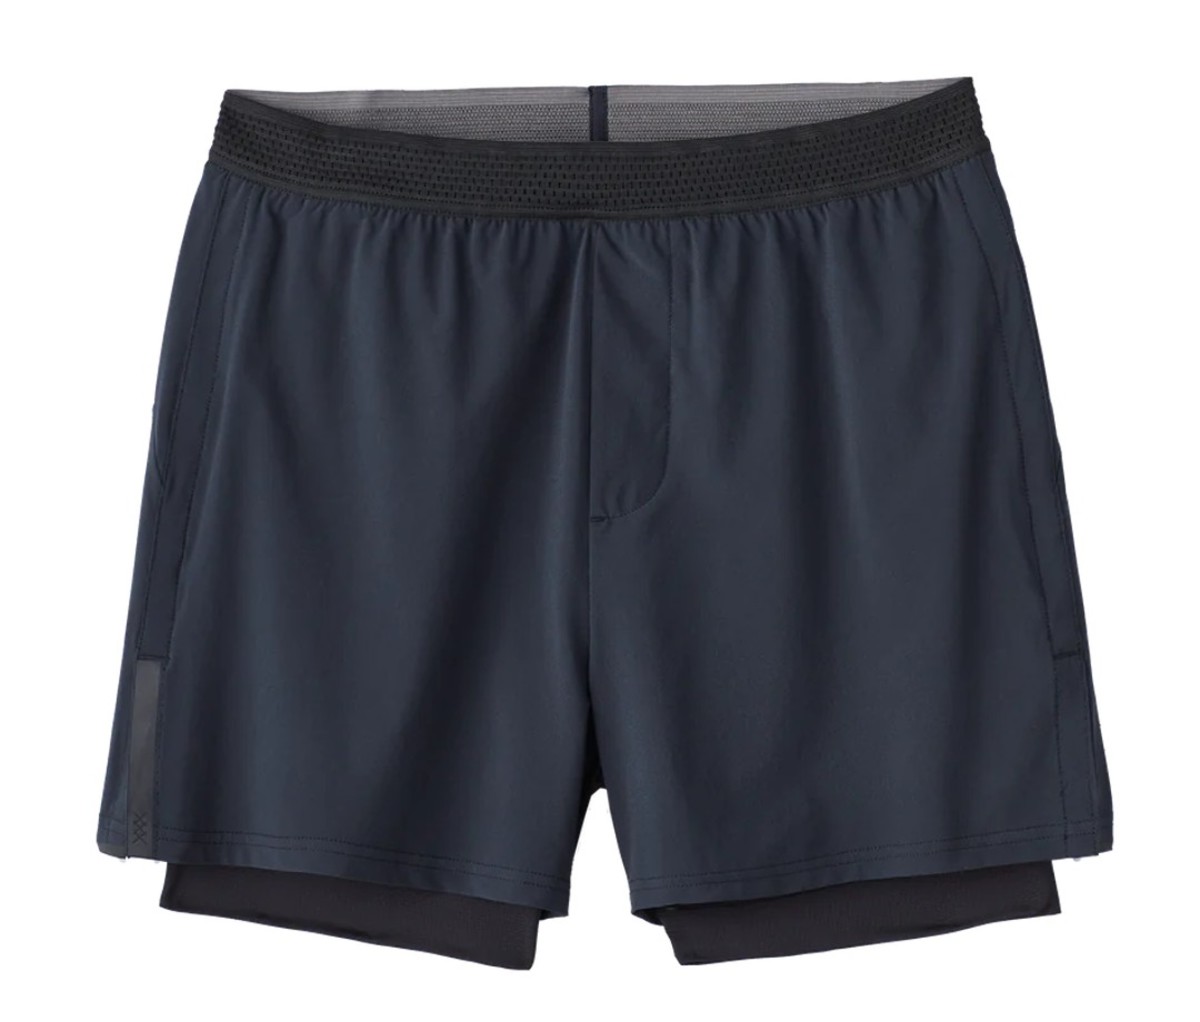 These are the best gym shorts for men – Gentlemans Journal Shop